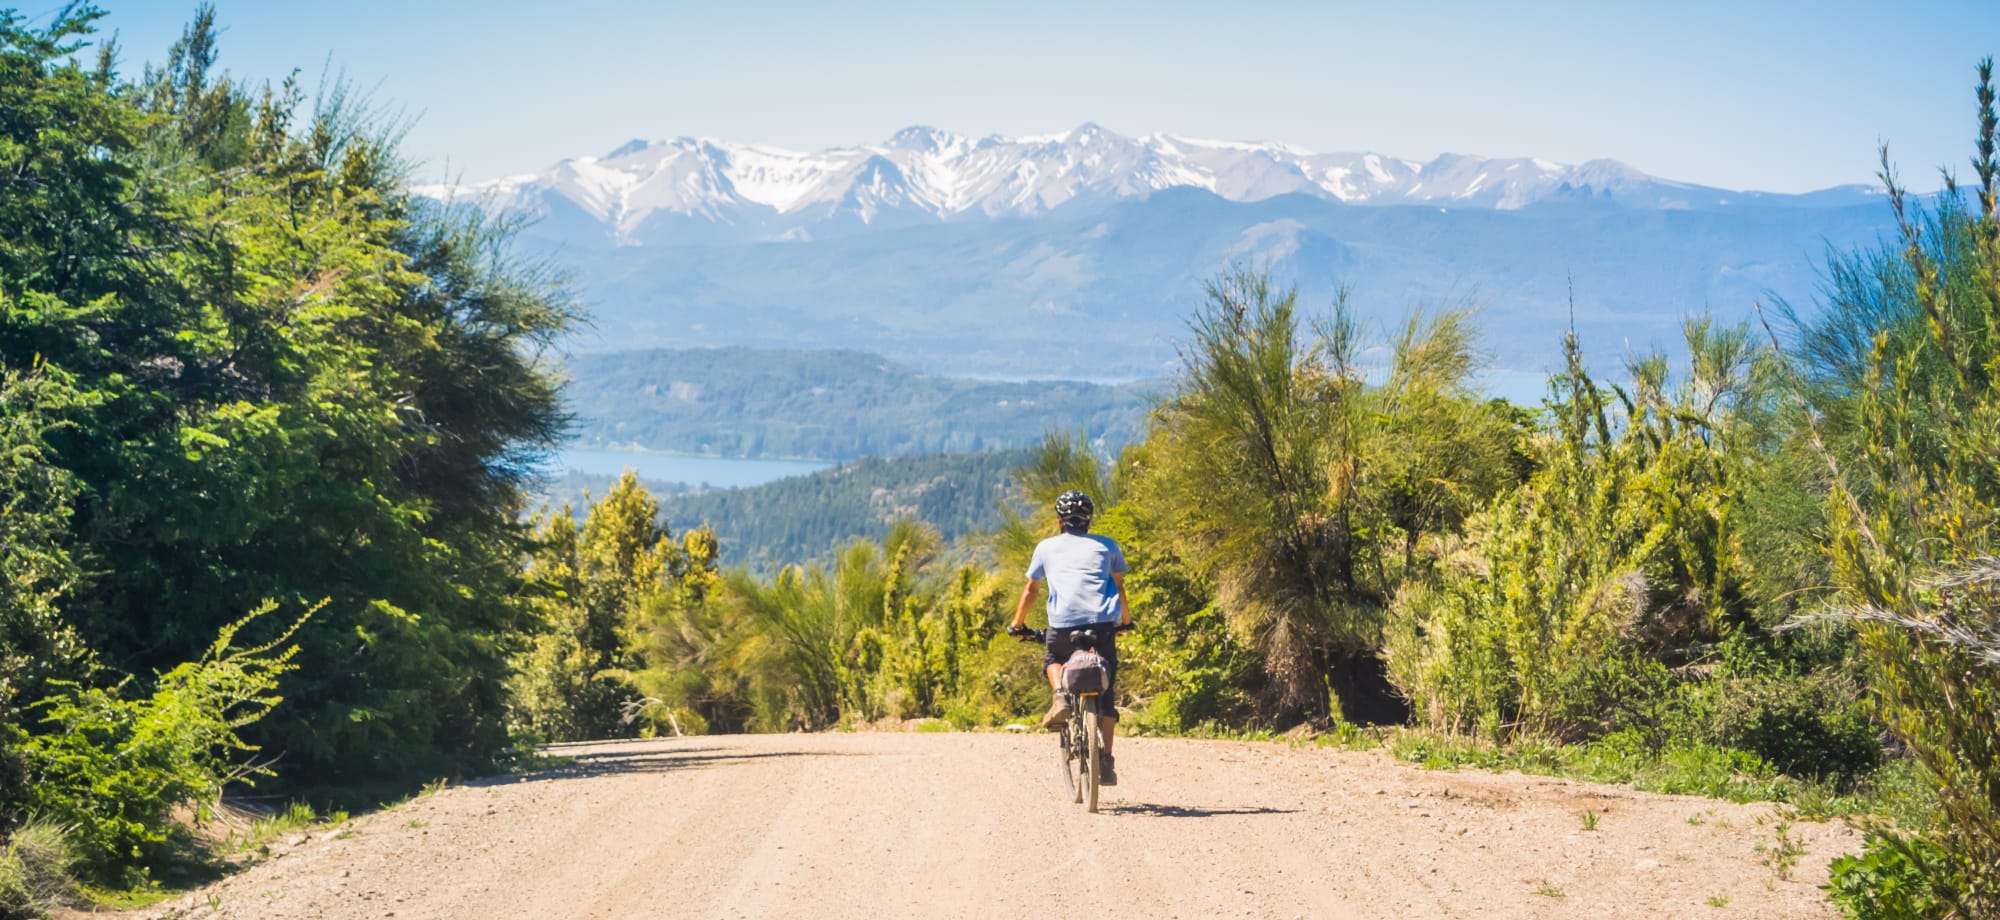 A man is cycling along a dirt road with Patagonia's snow-capped mountains in the distance.